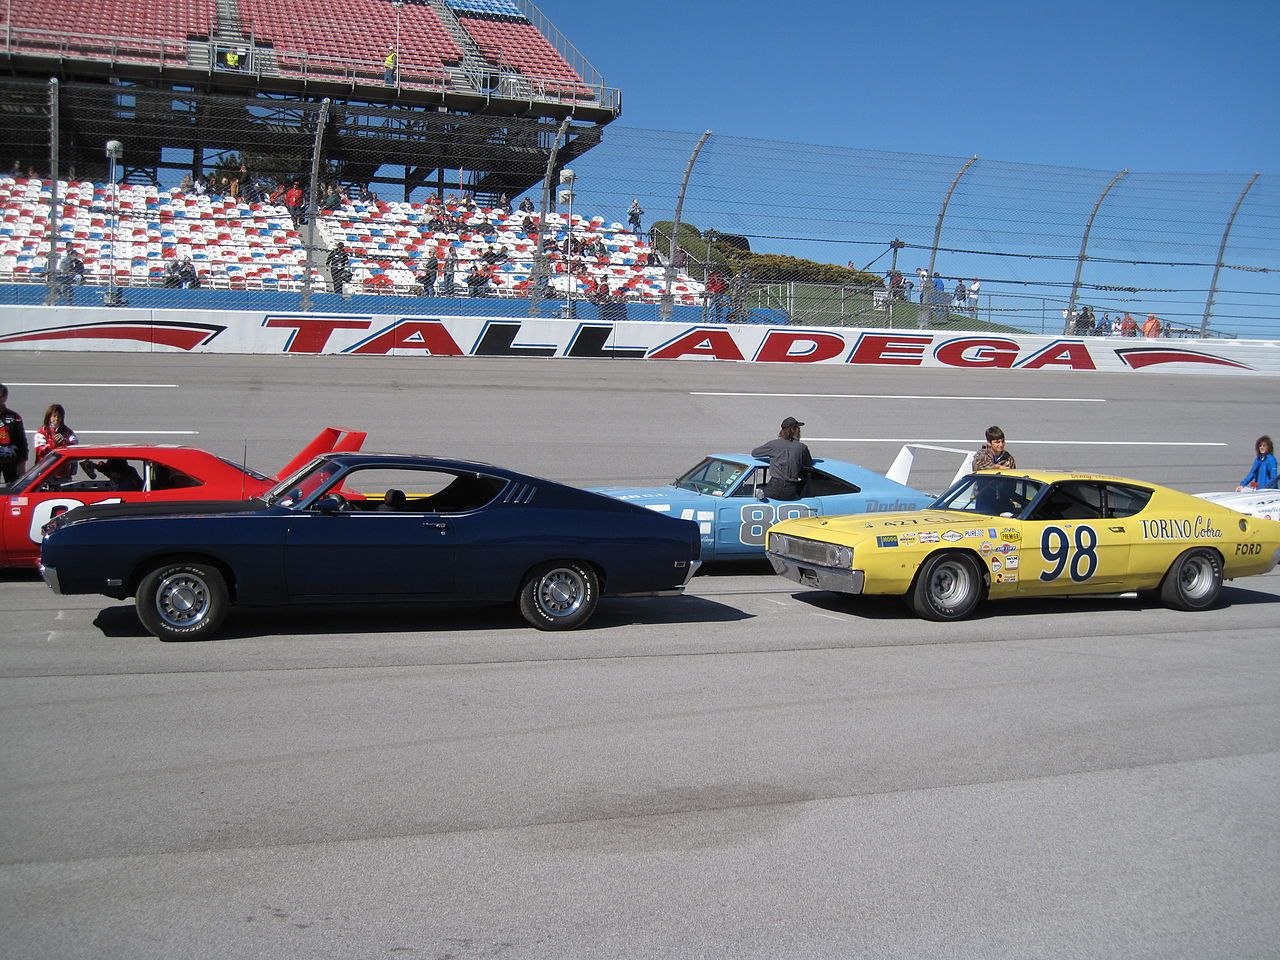 A parked 1969 Ford Talladega